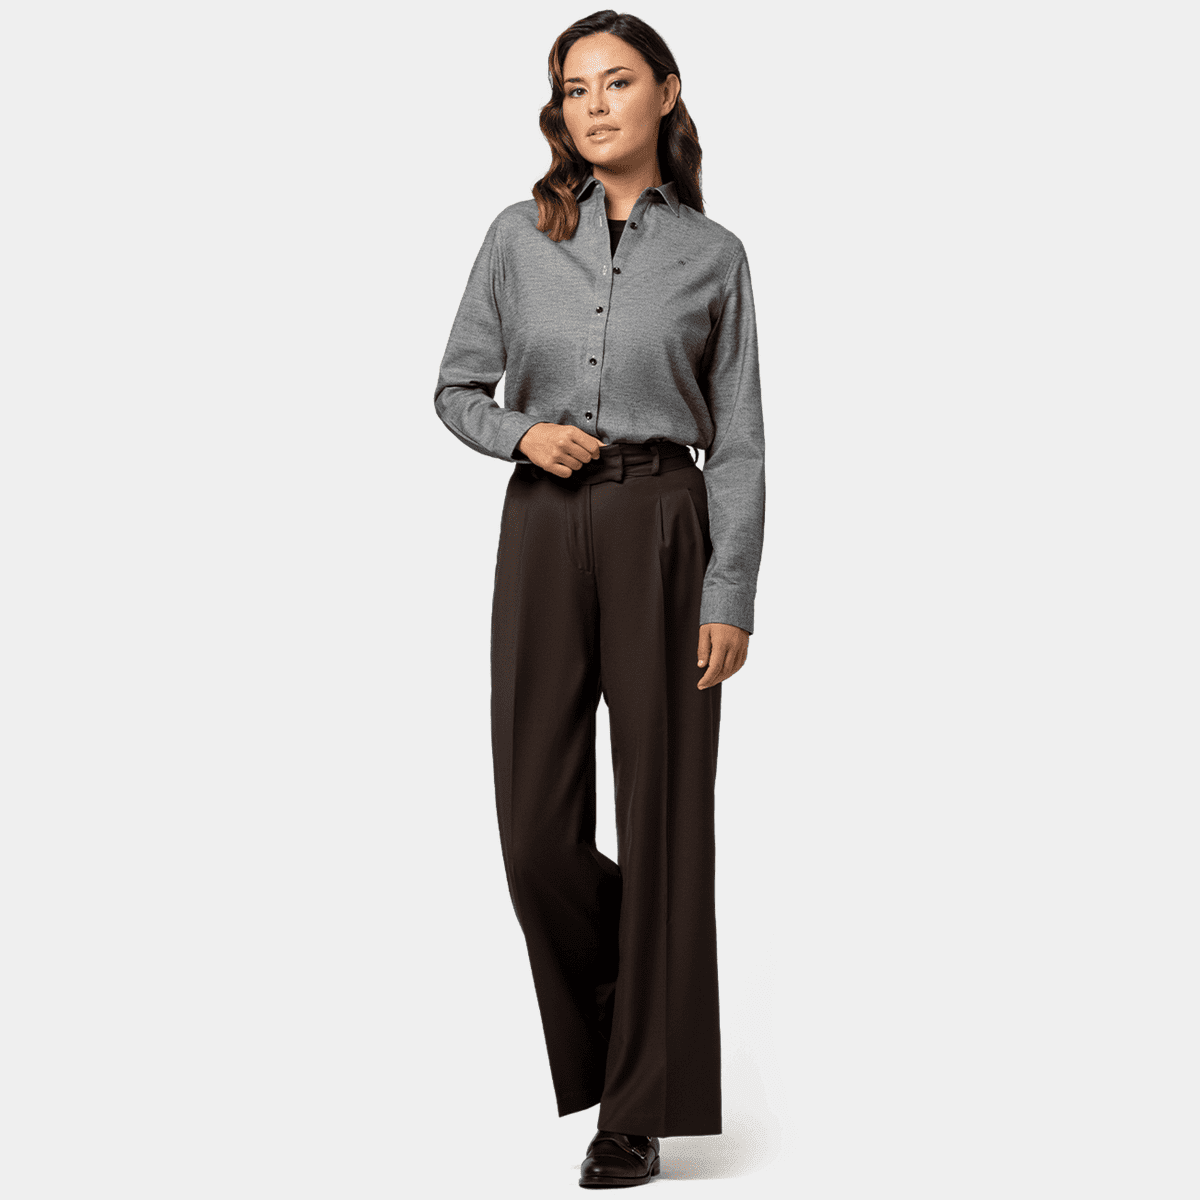 Chocolate brown high waisted pleated year-round Wide leg Pants